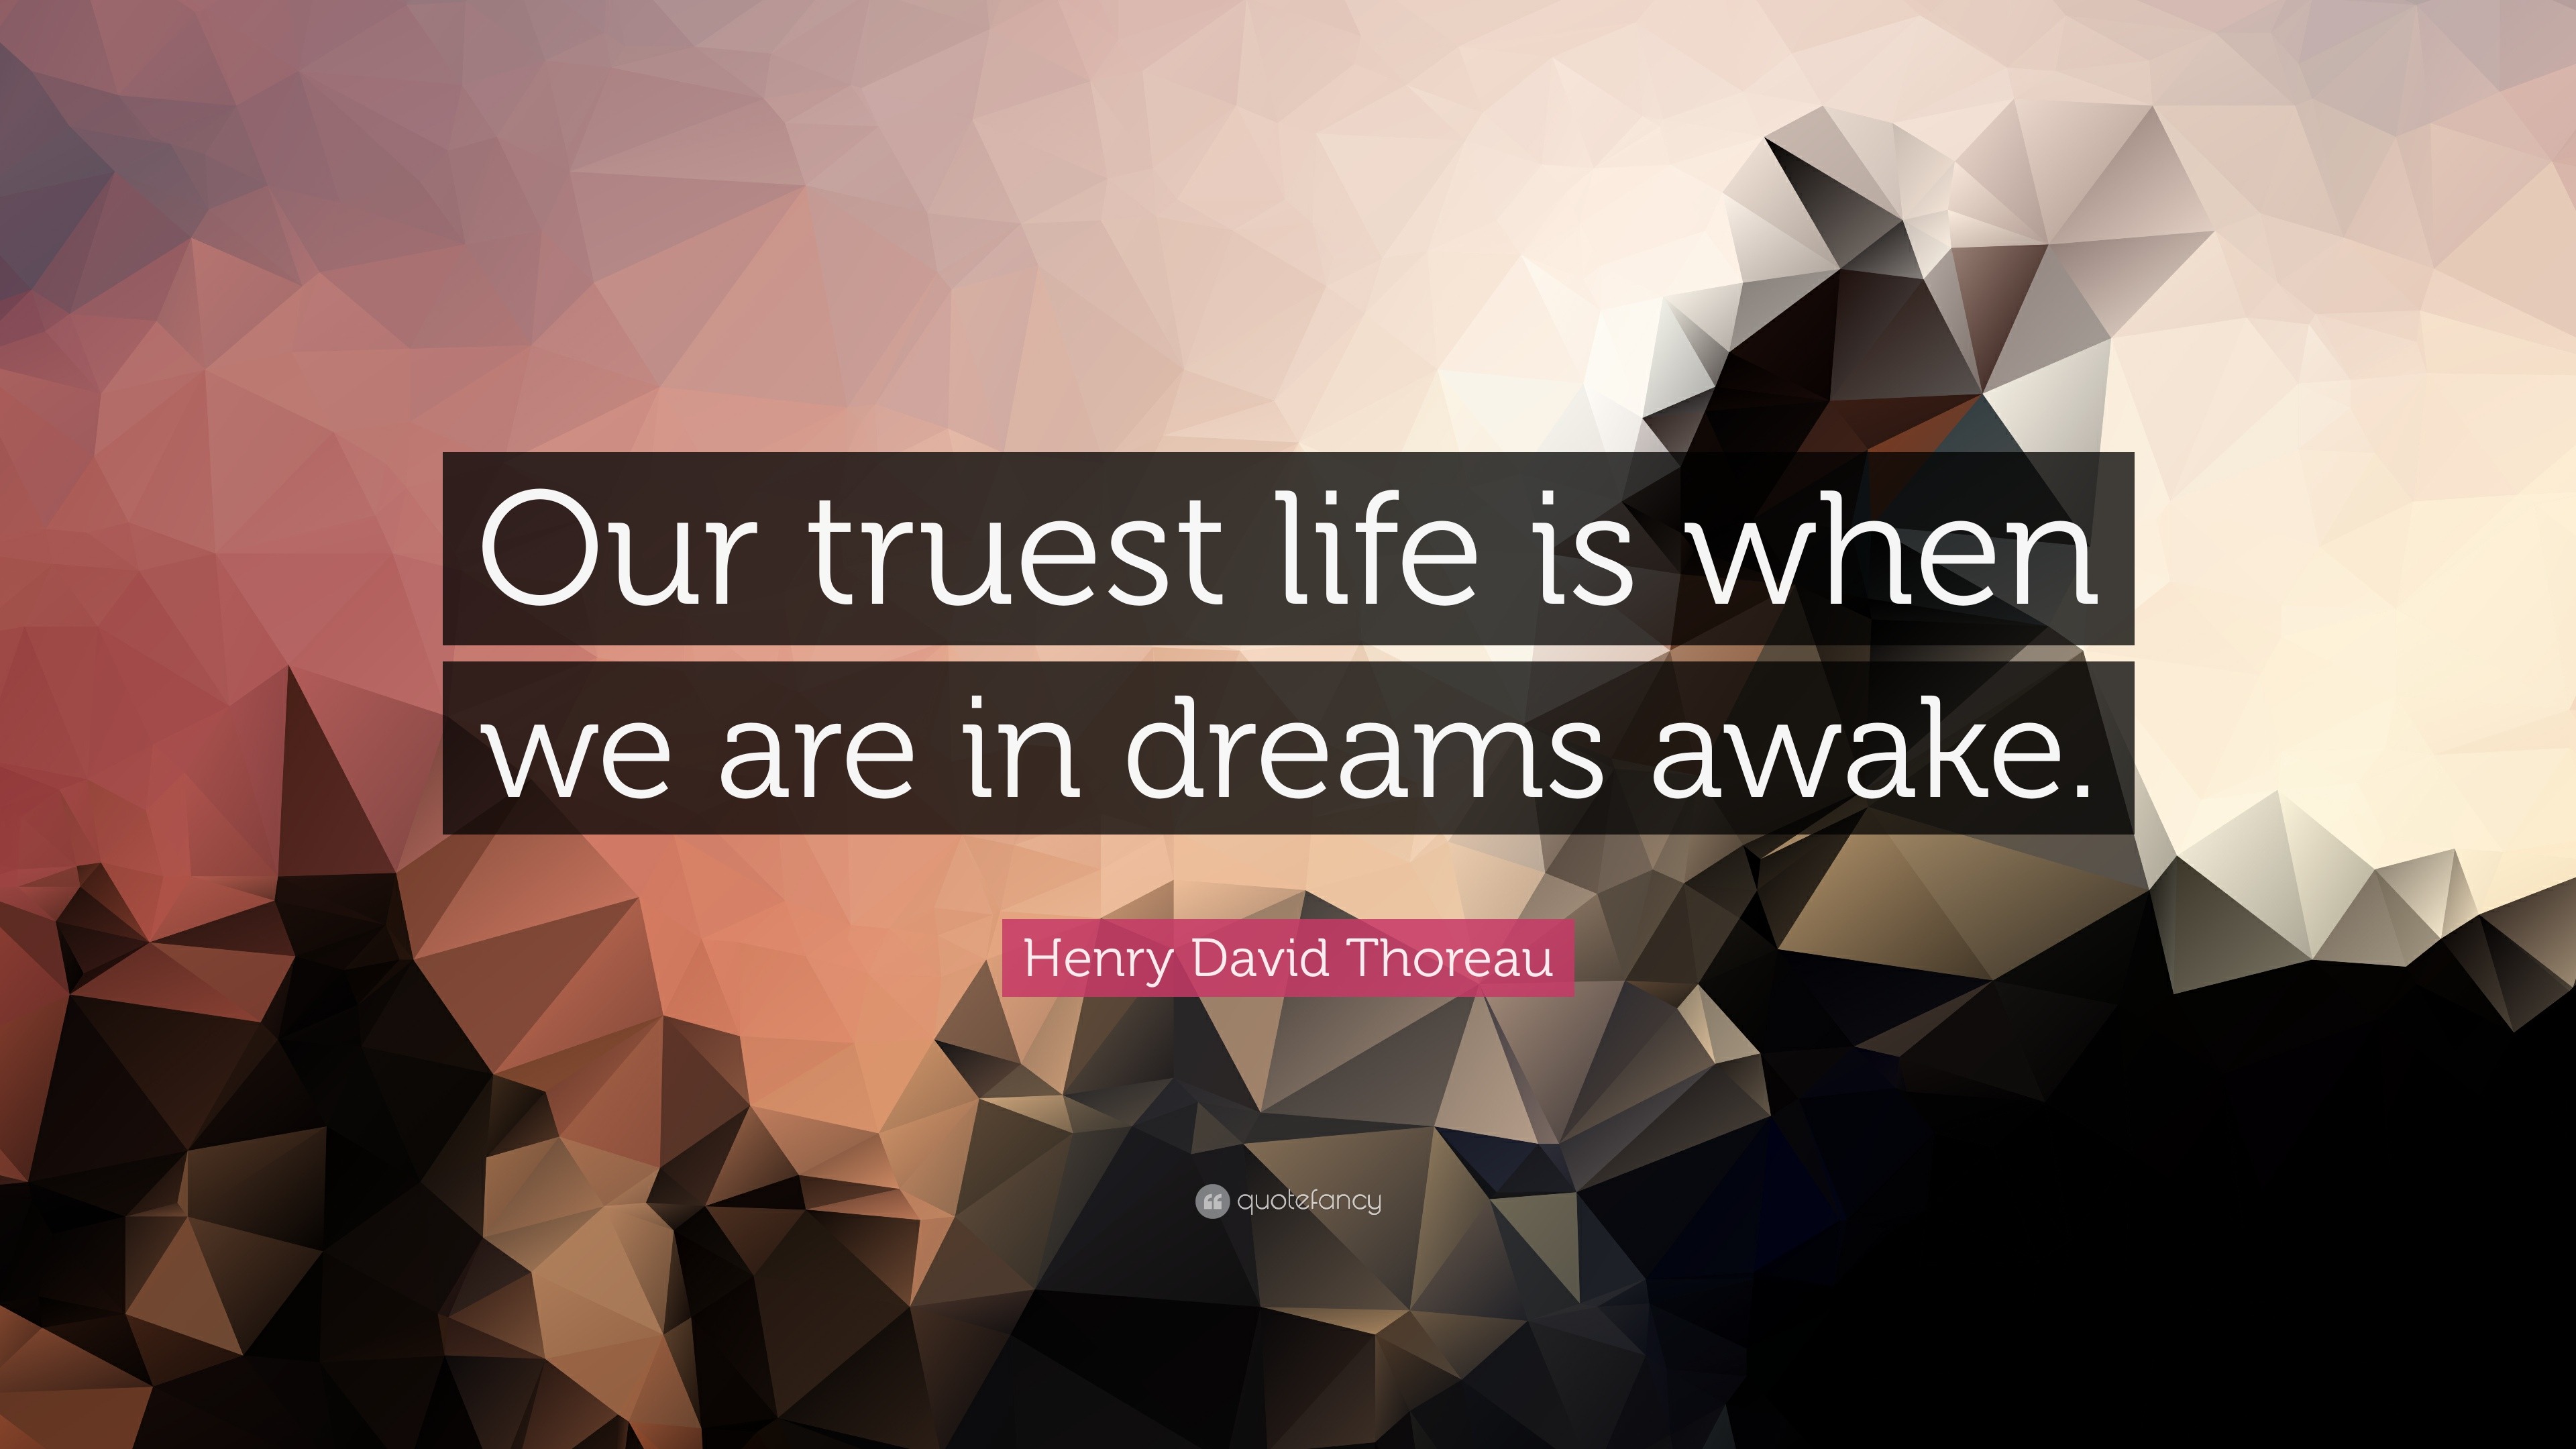 Henry David Thoreau Quote: “Our truest life is when we are in dreams ...